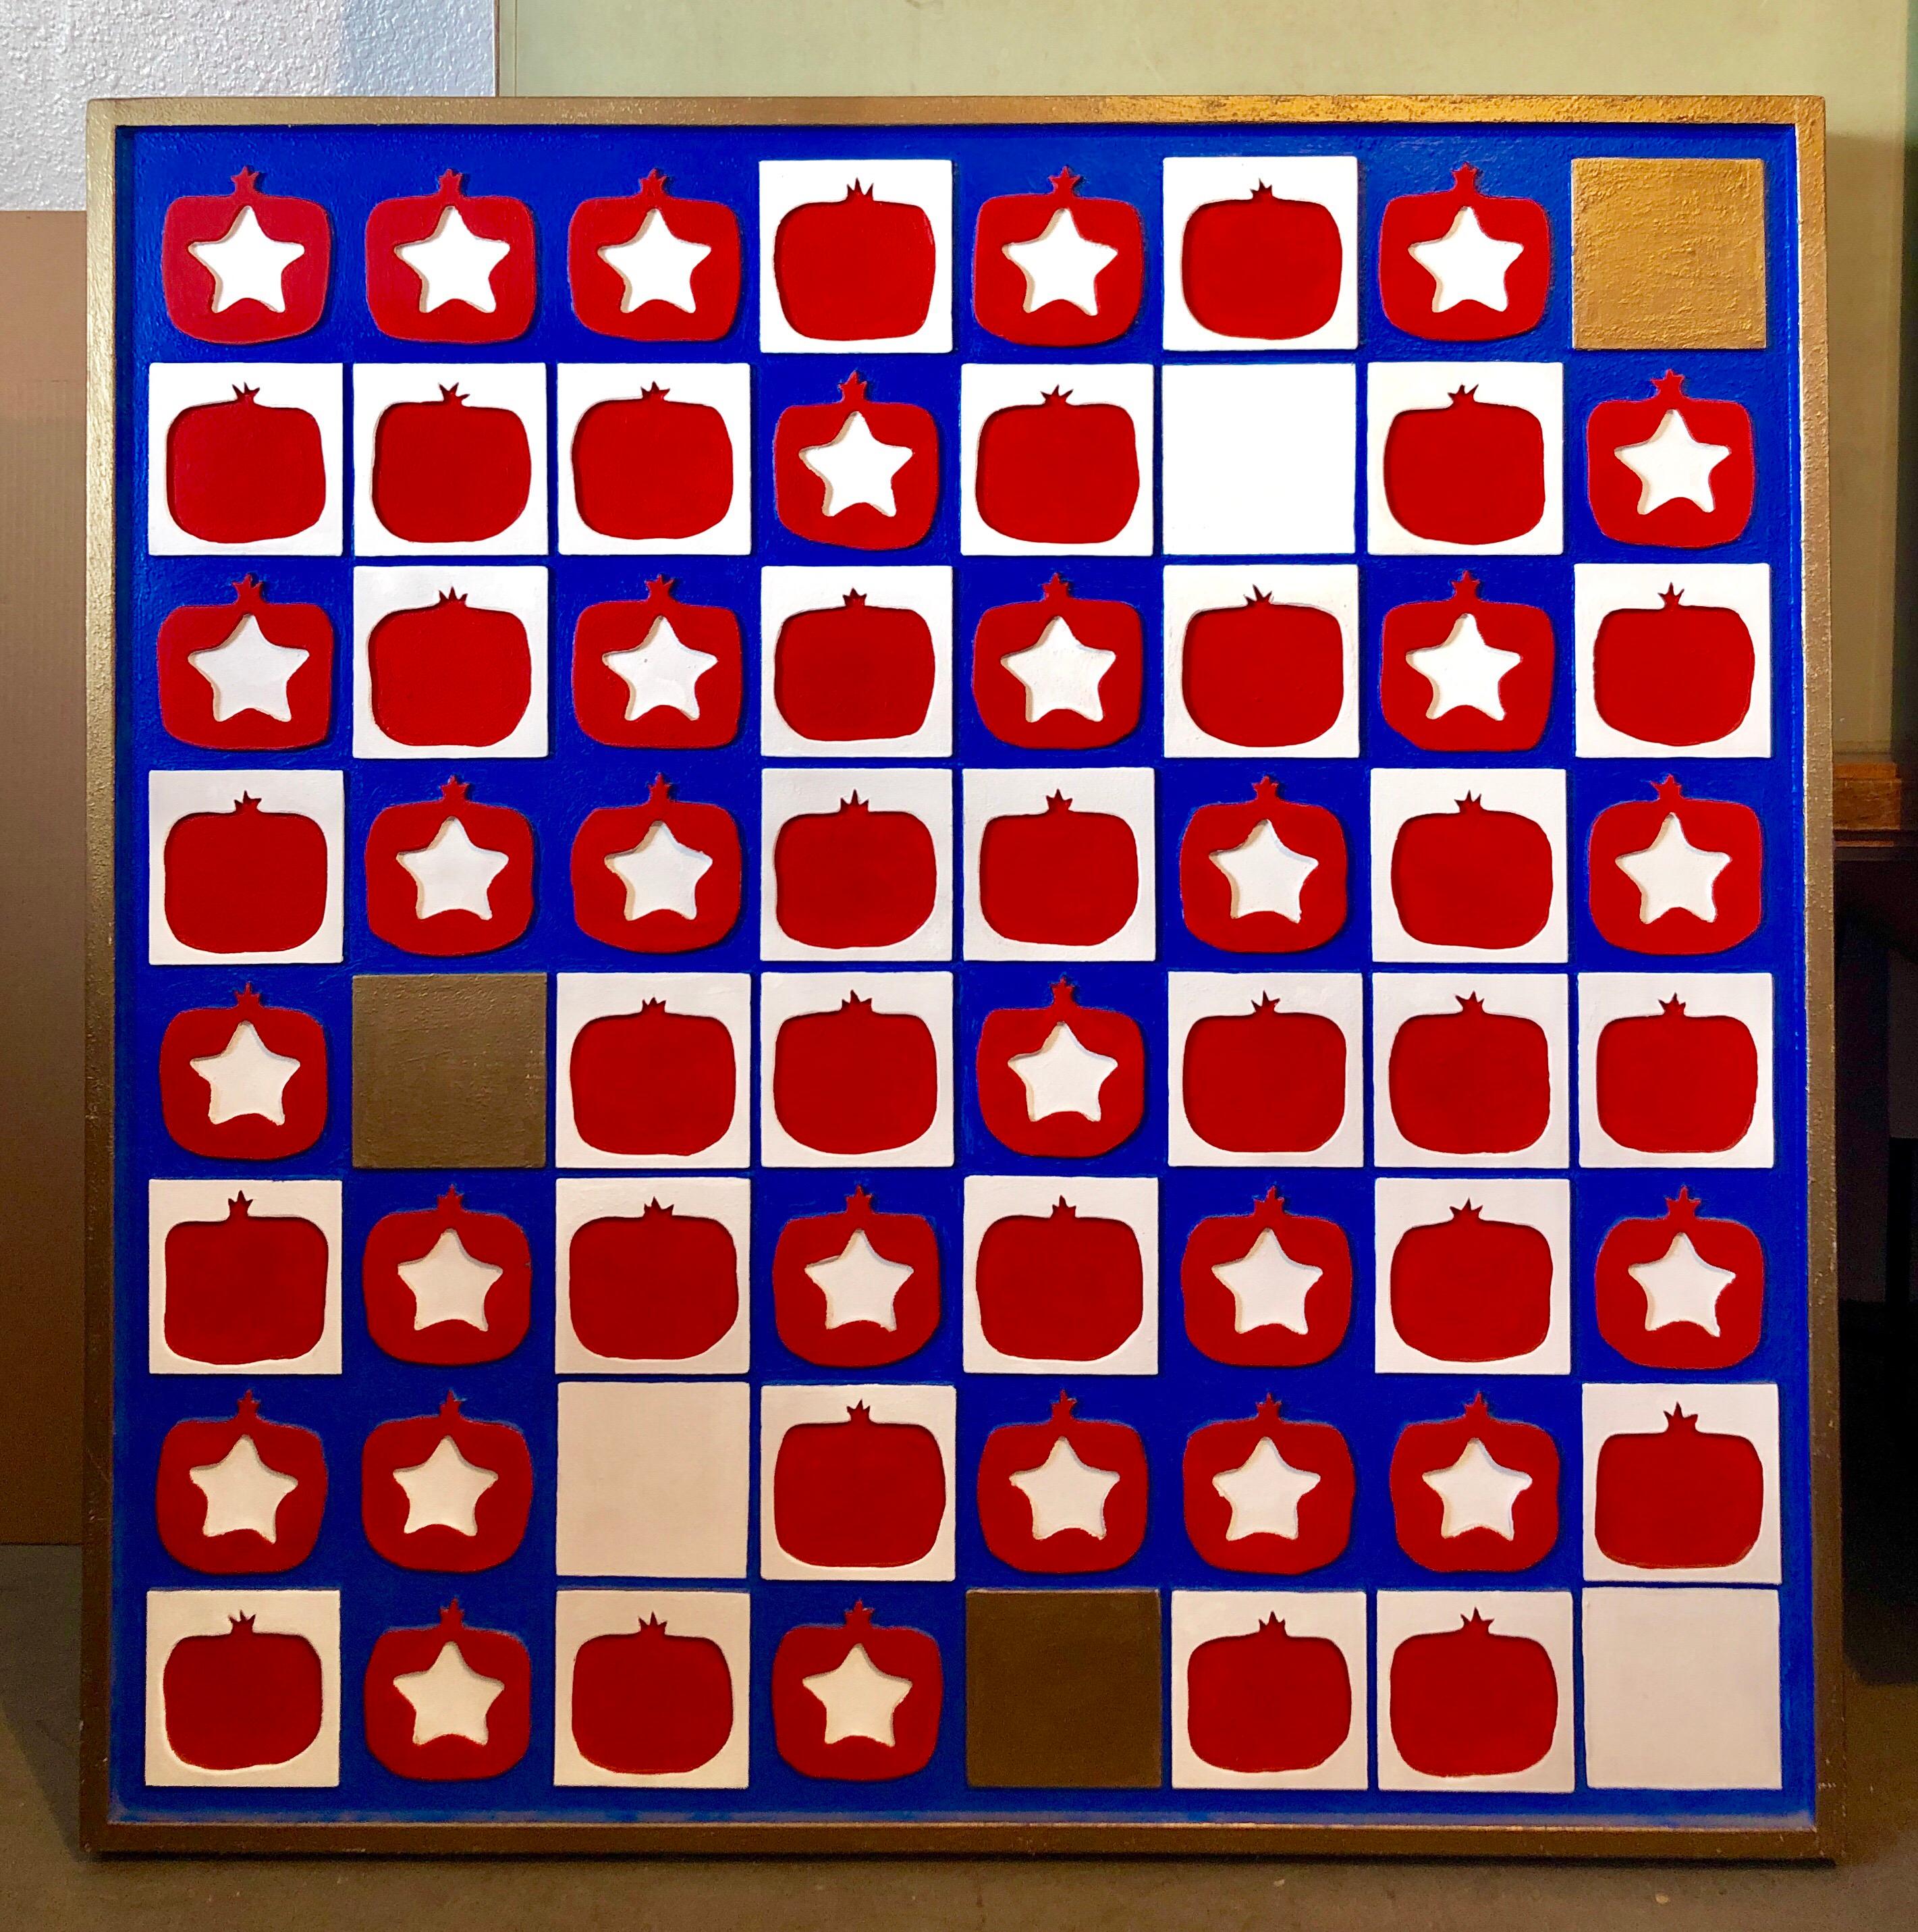 Red White Blue Americana Wall Hanging Painting Sculpture American Flag Motif - Brown Figurative Sculpture by Oded Halahmy